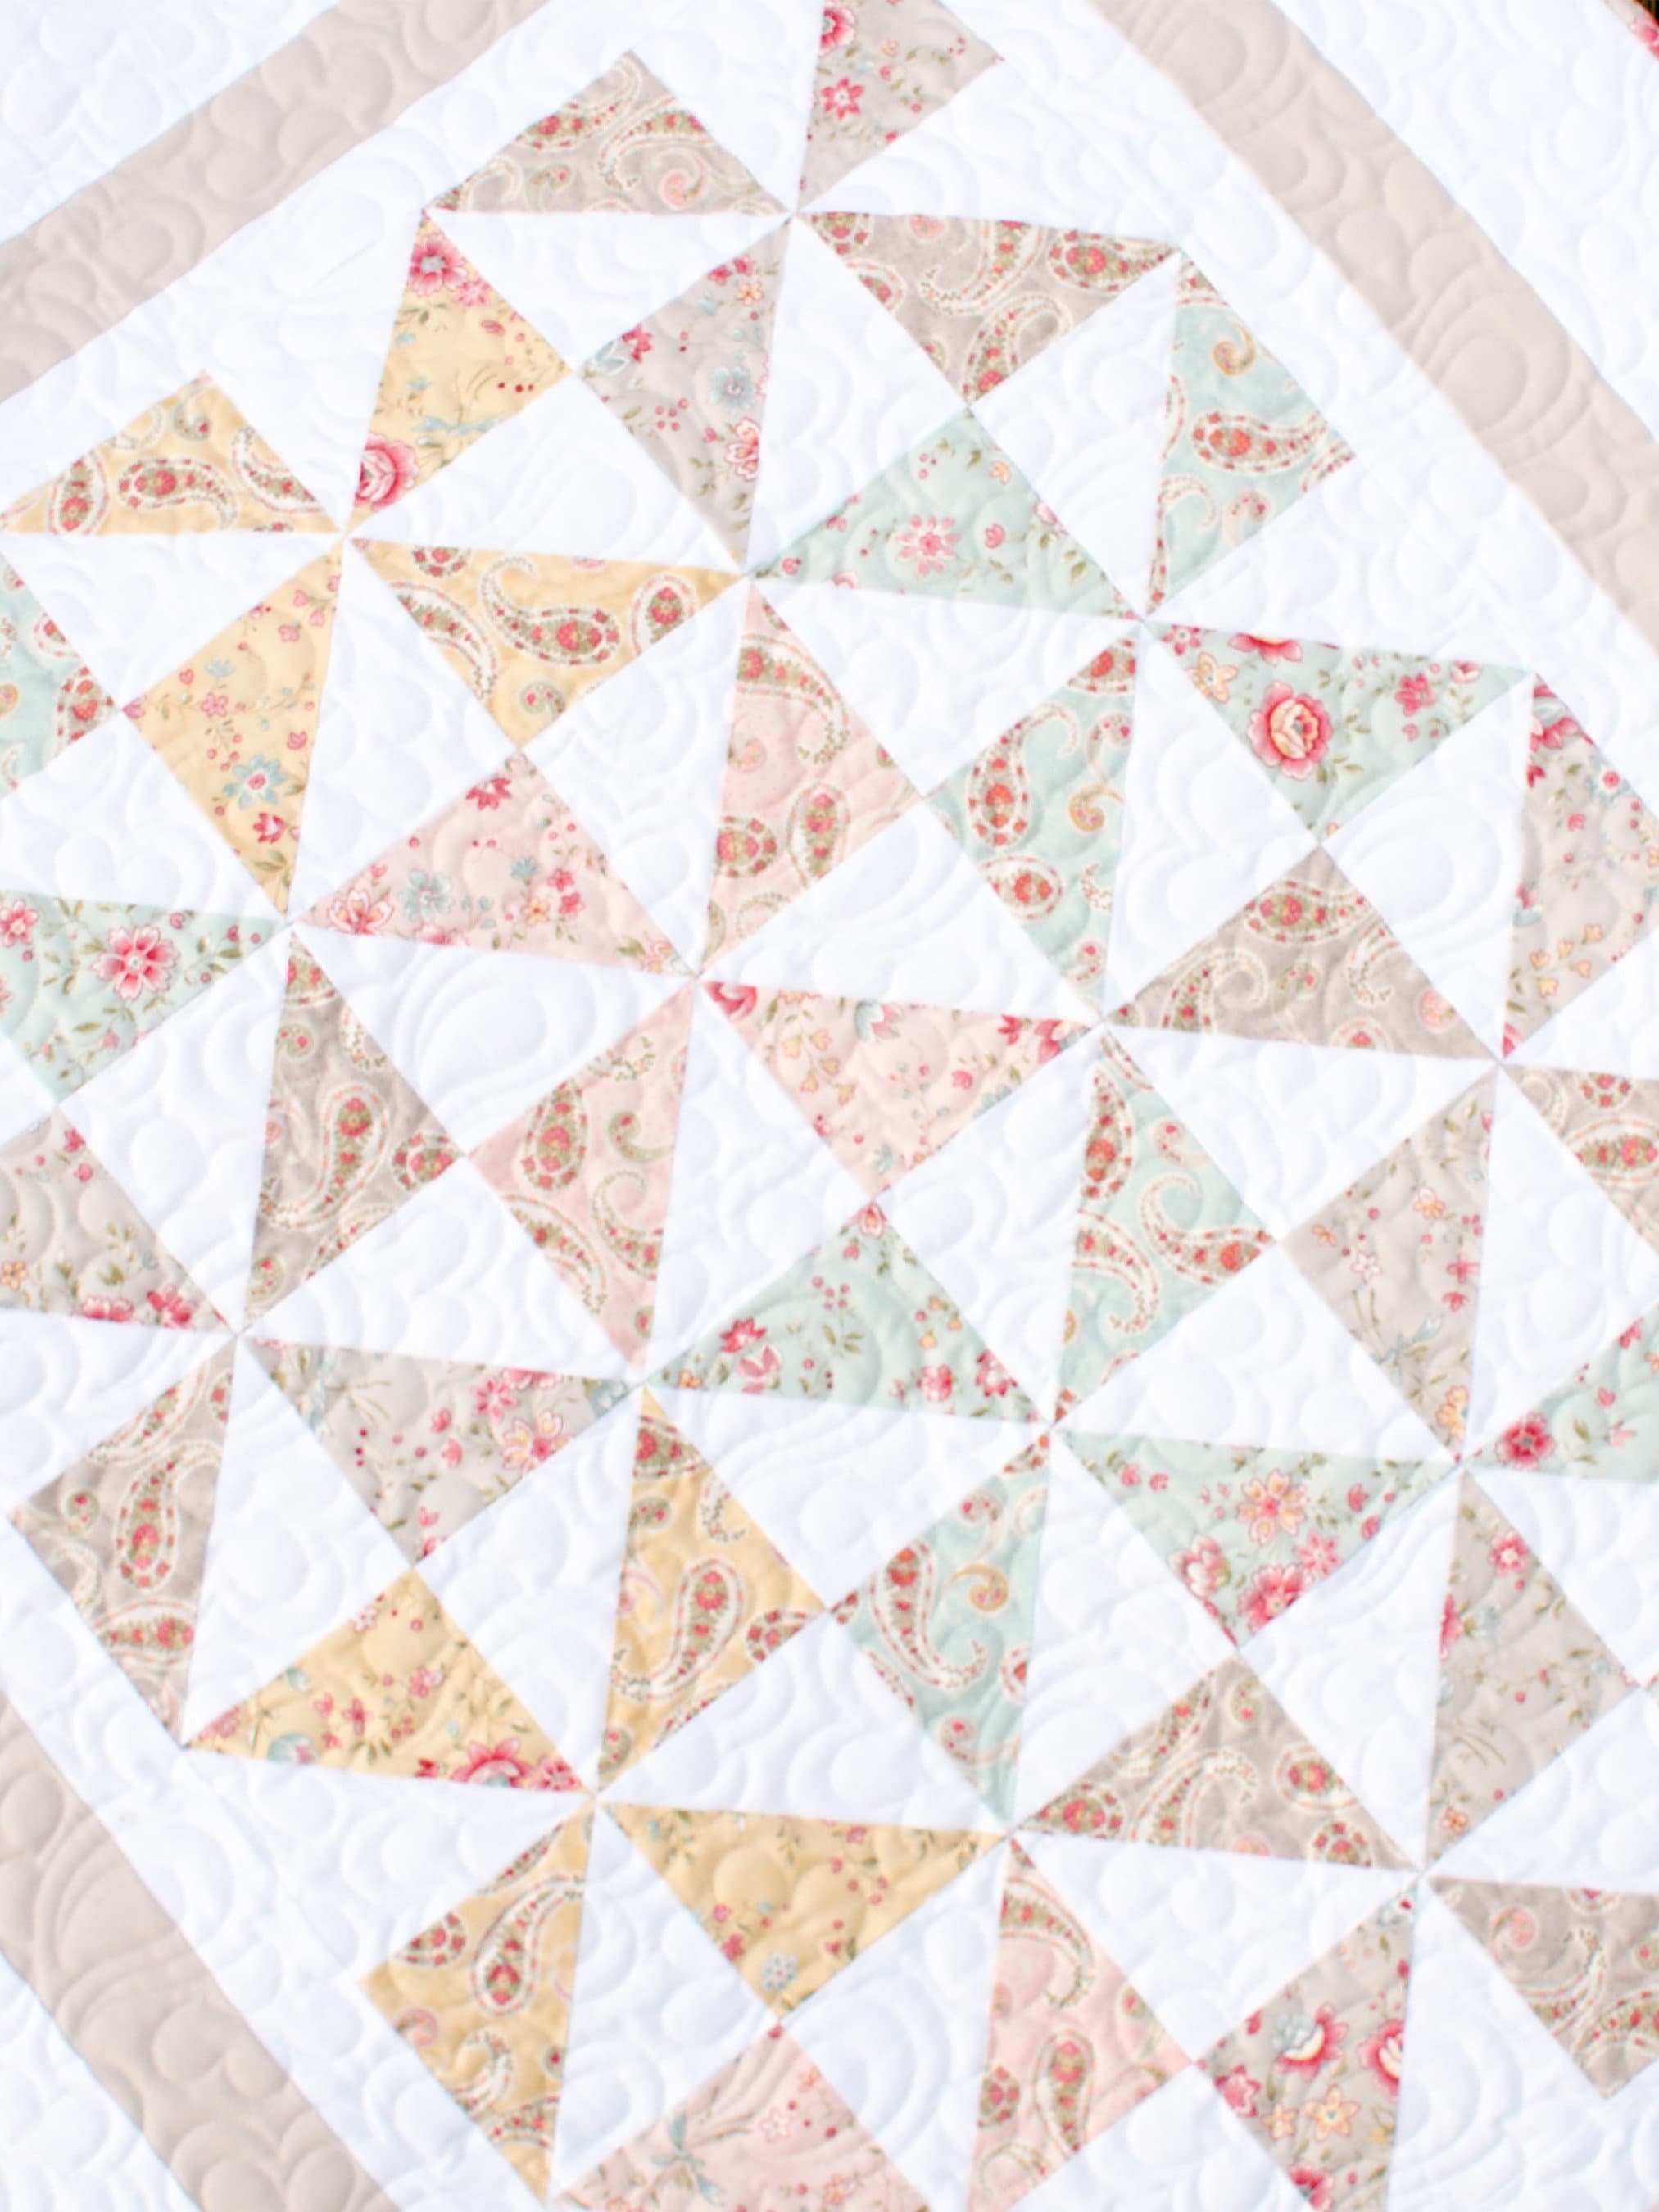 3-Yard Quilt Pattern: HEARTLAND by Fabric Café. Make an easy 3-yard quilt.  Fabric Bundles available.